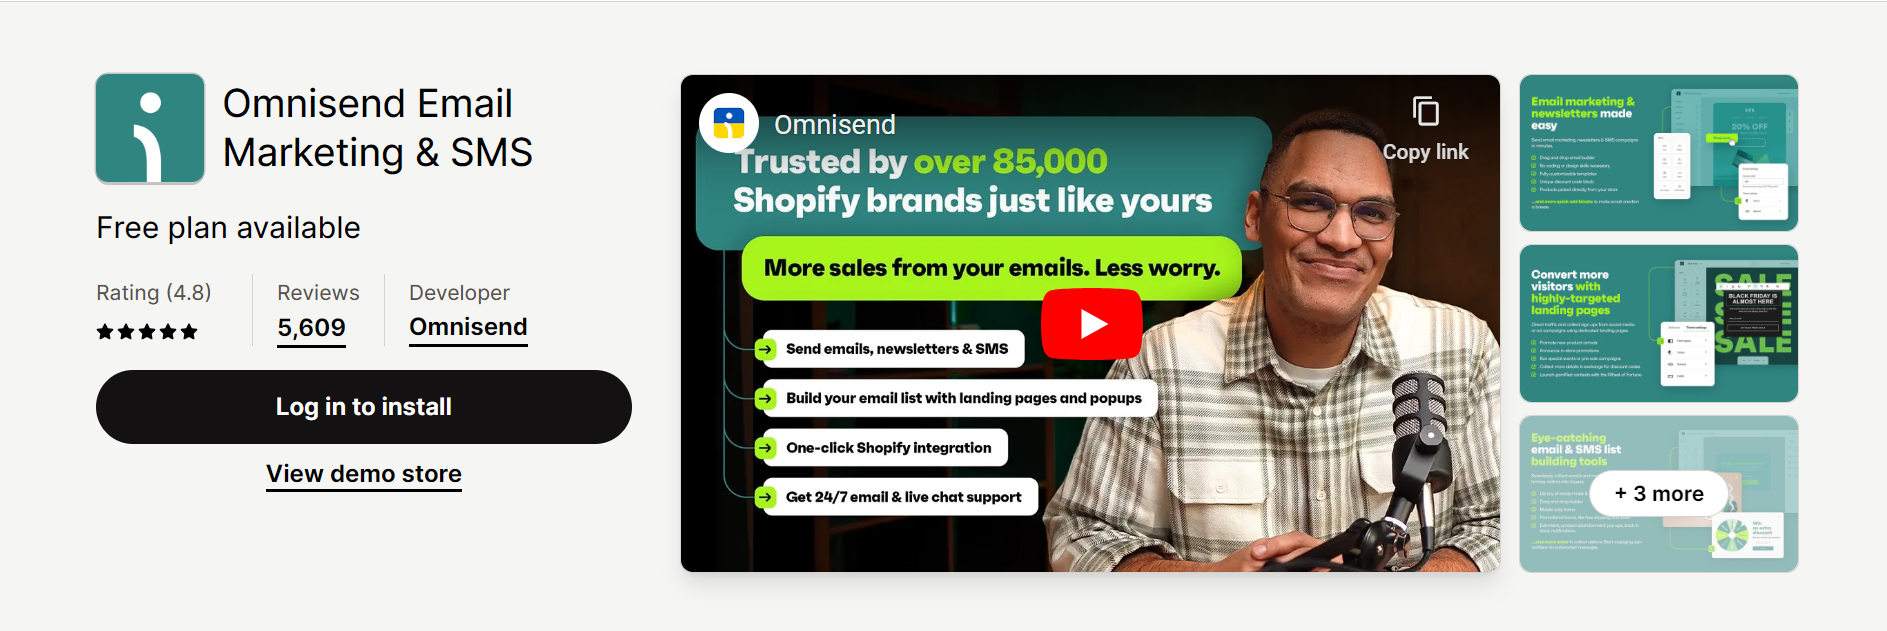 Omnisend Email Marketing & SMS